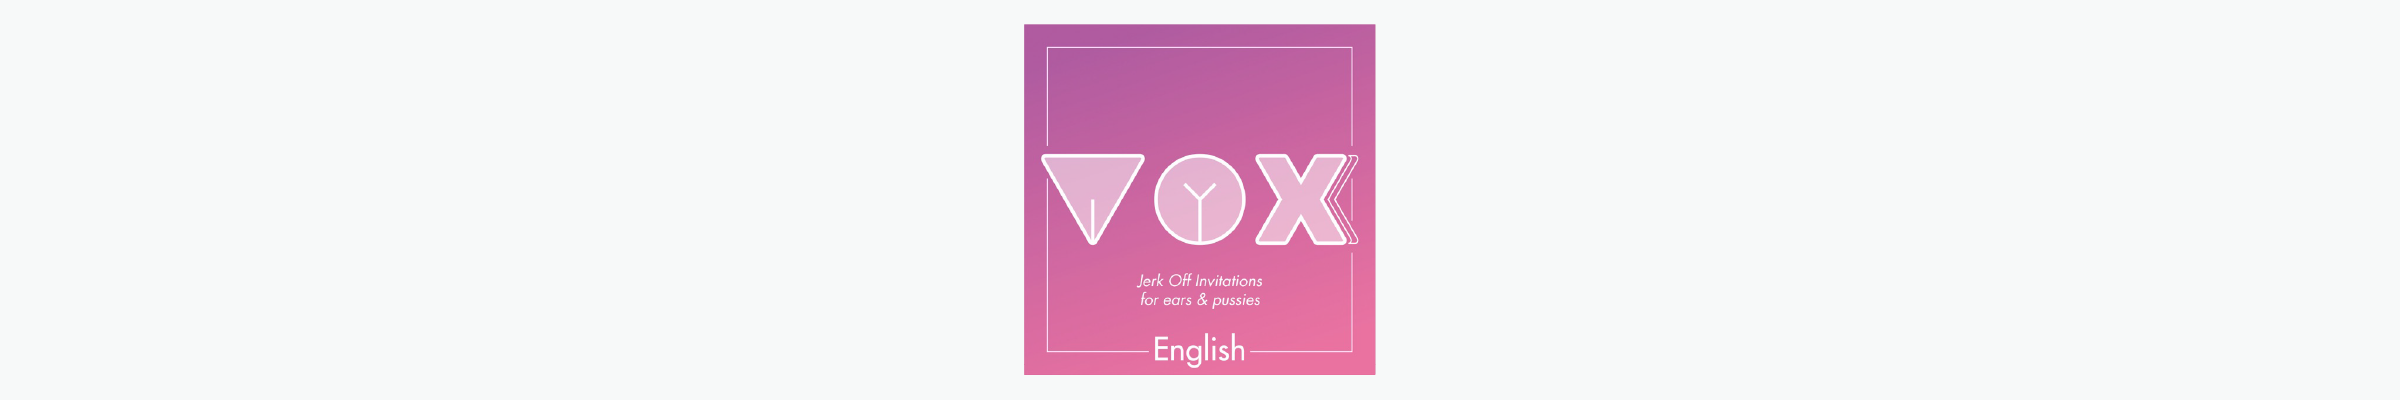 Banner showing VOXXX podcast